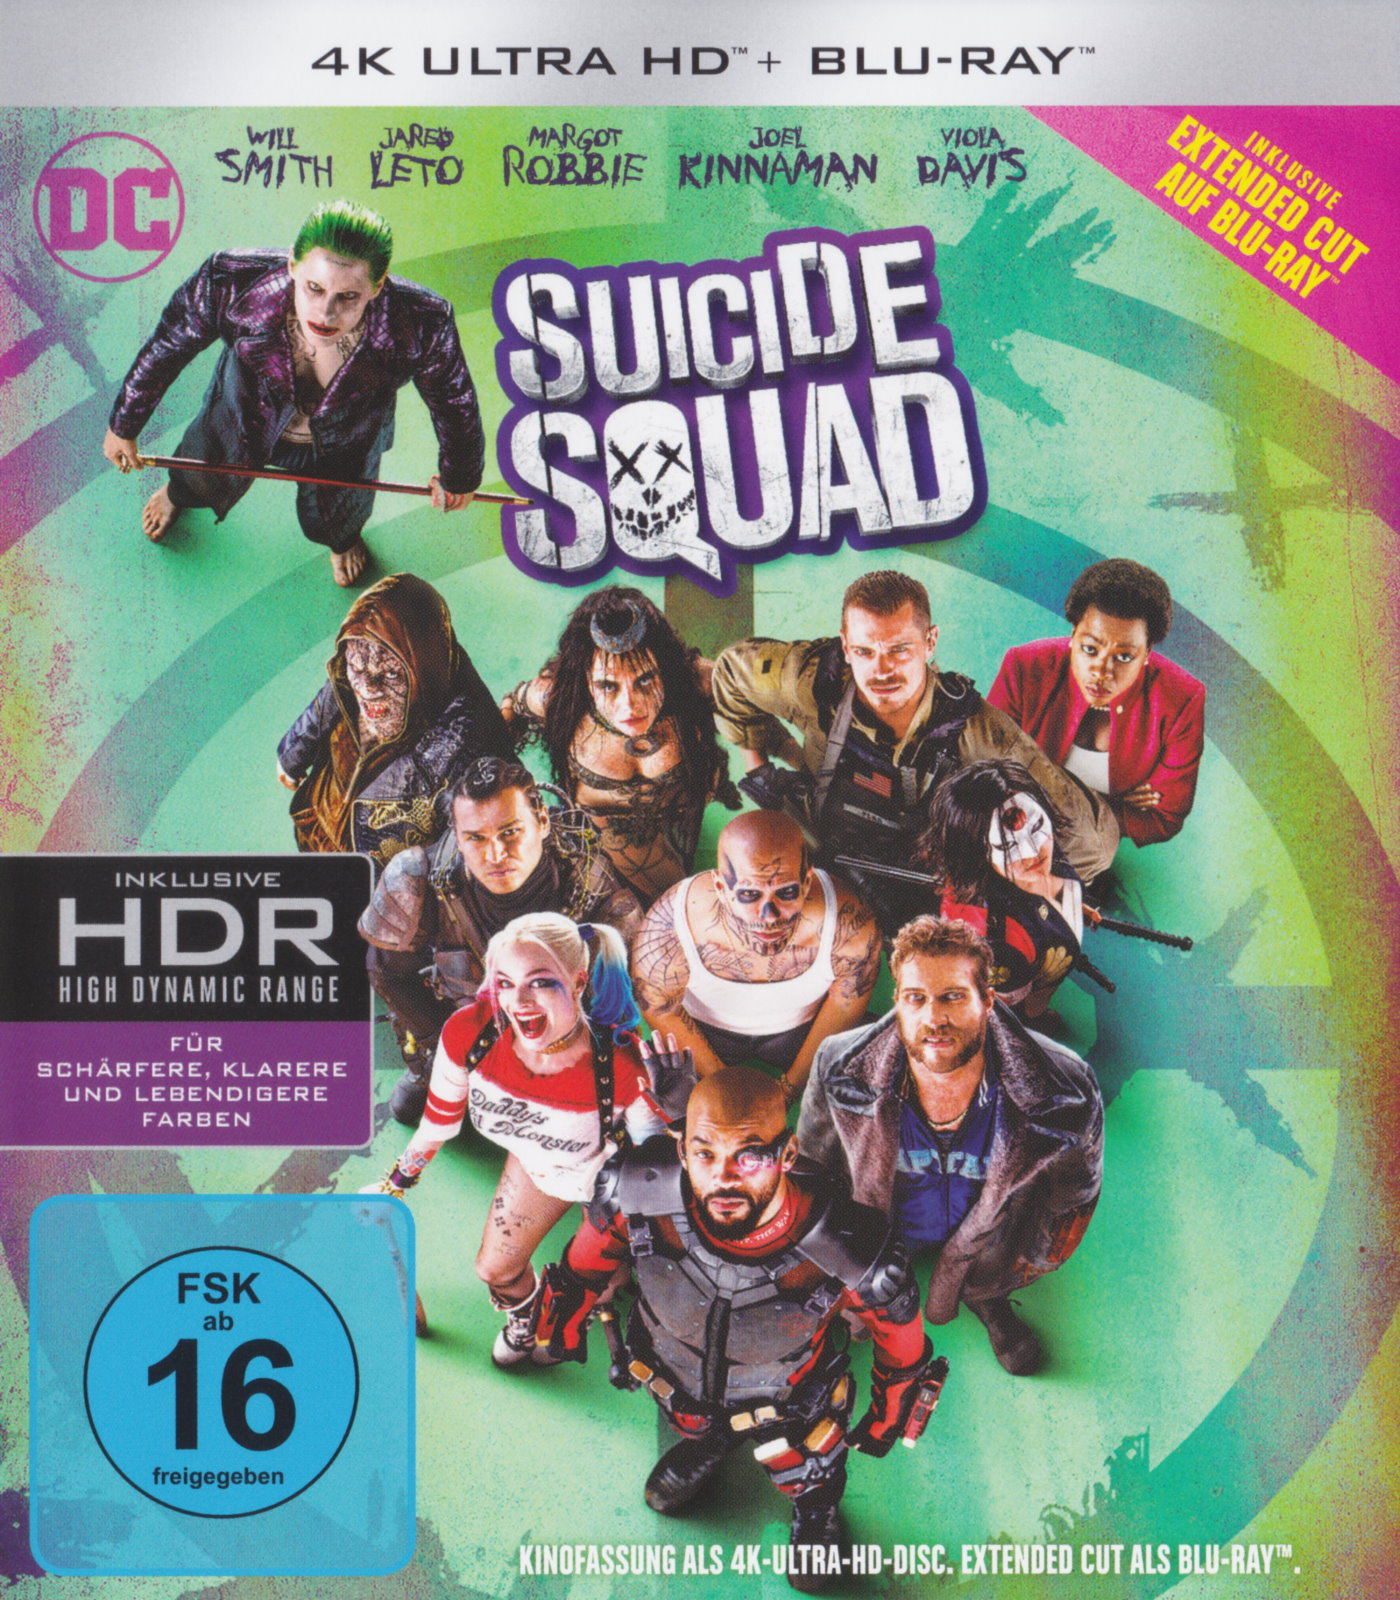 Cover - Suicide Squad.jpg